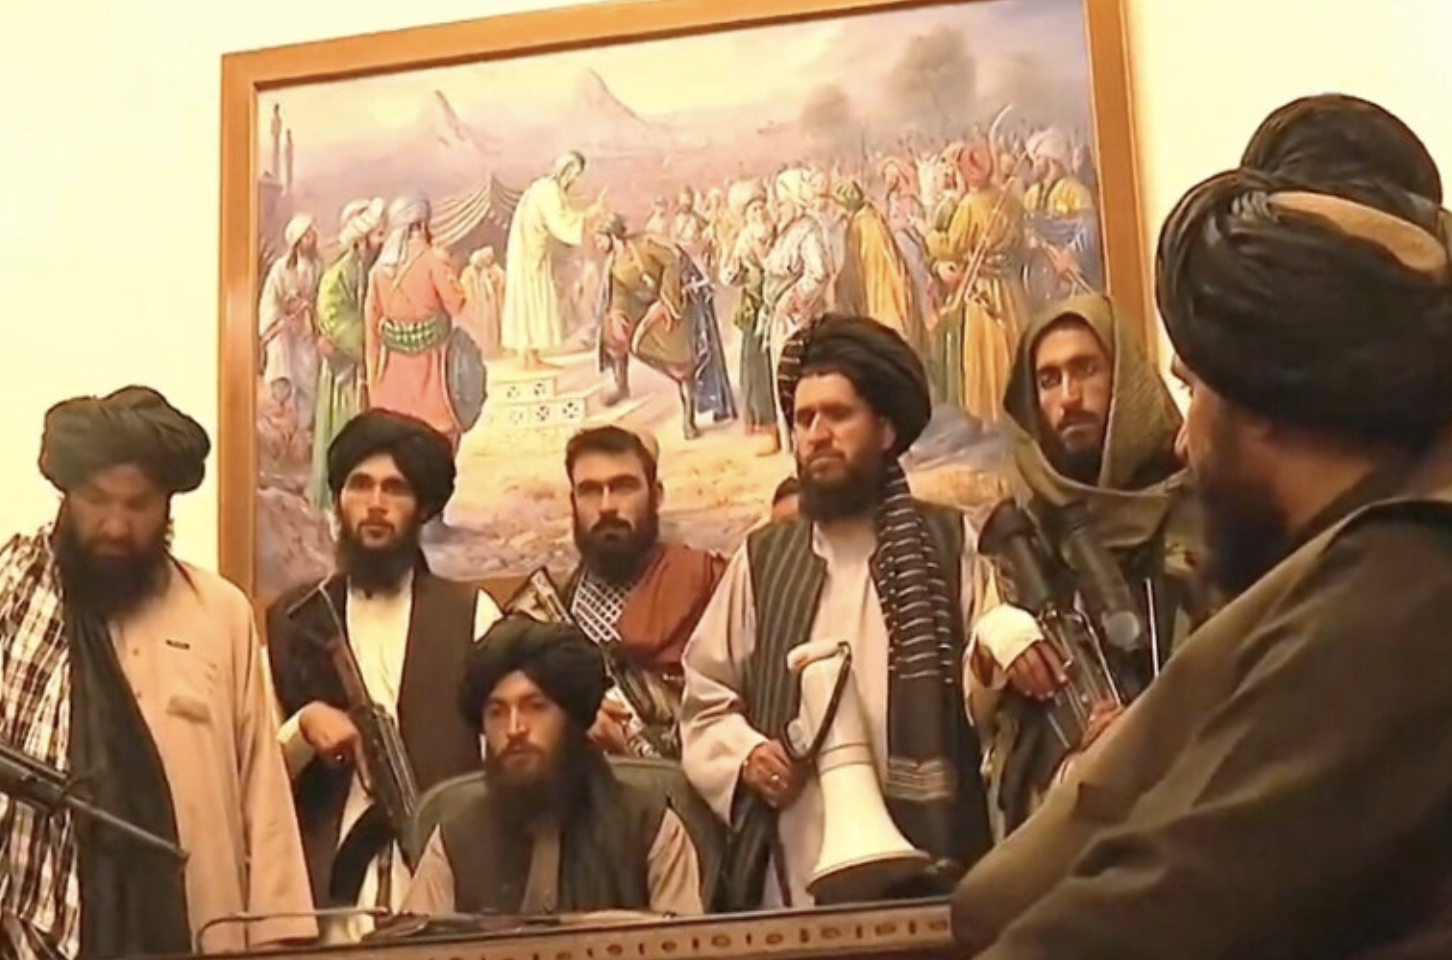 A group of Taliban fighters in a government office in Kabul, Afghanistan, the day they took control of the country, August 15, 2021. (Photo by Daniel Moskowitz) Public domain